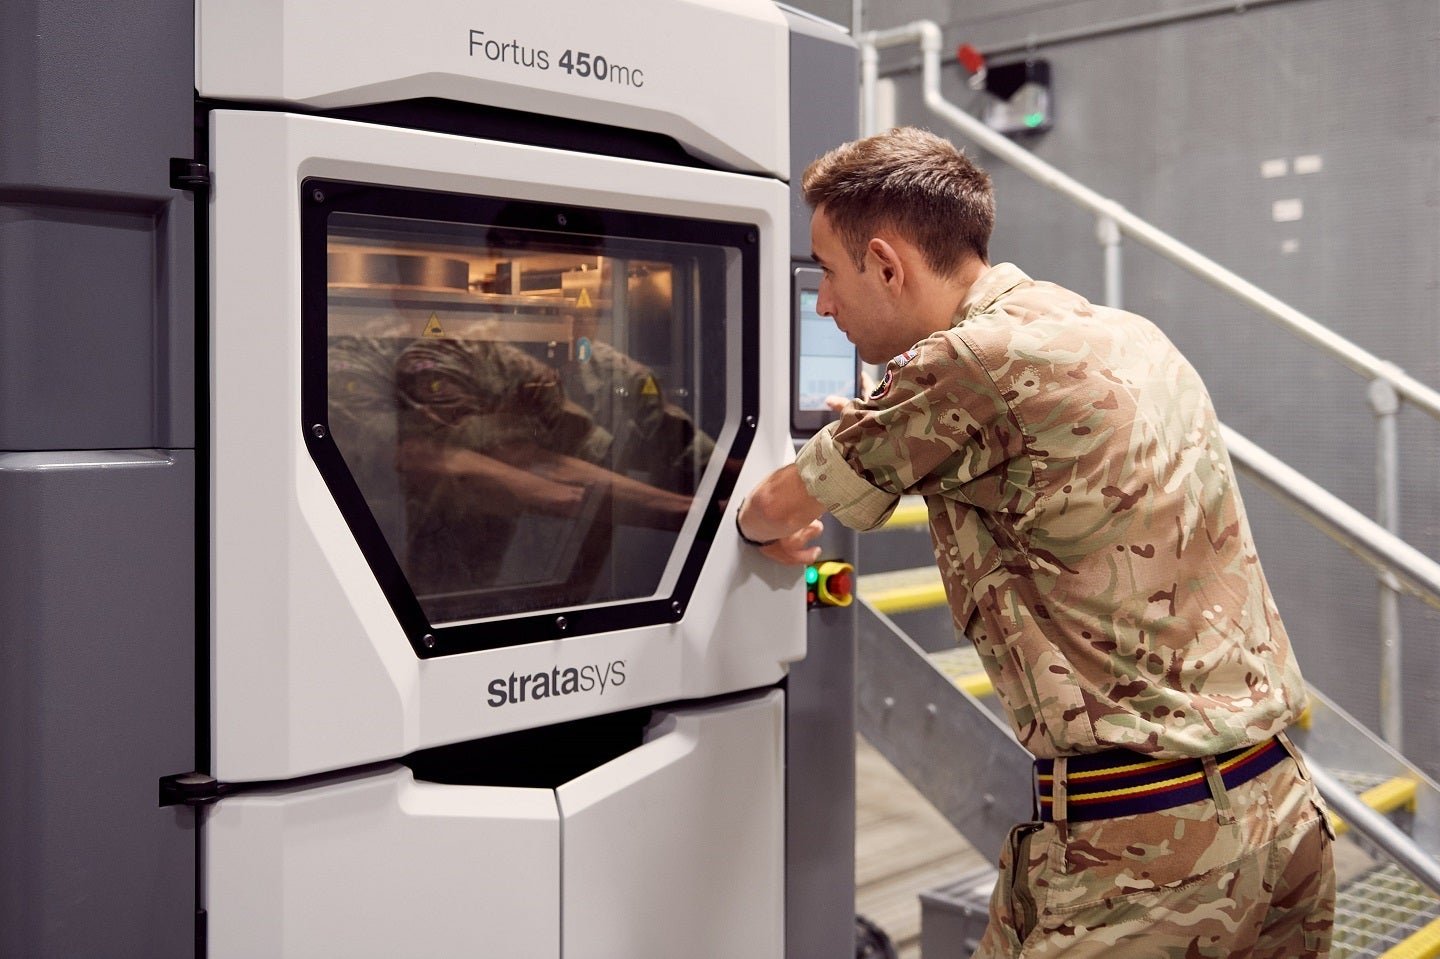 3D printing is set to redefine aerospace and defence logistics, says GlobalData